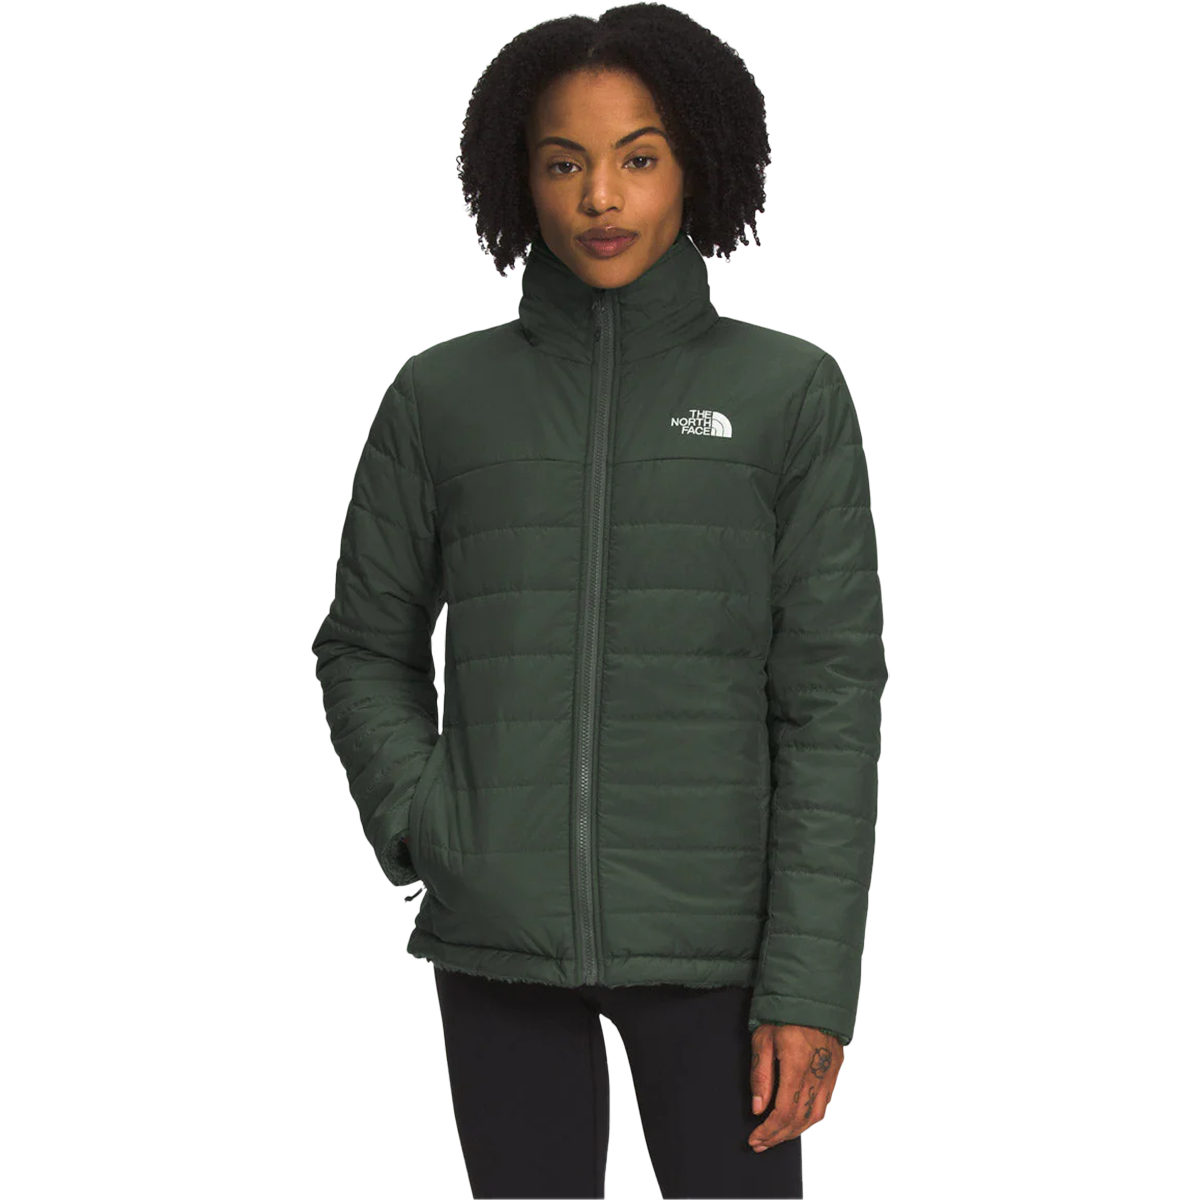 THE NORTH FACE Women's Winter Warm Tight, TNF Black, XS-REG at   Women's Clothing store